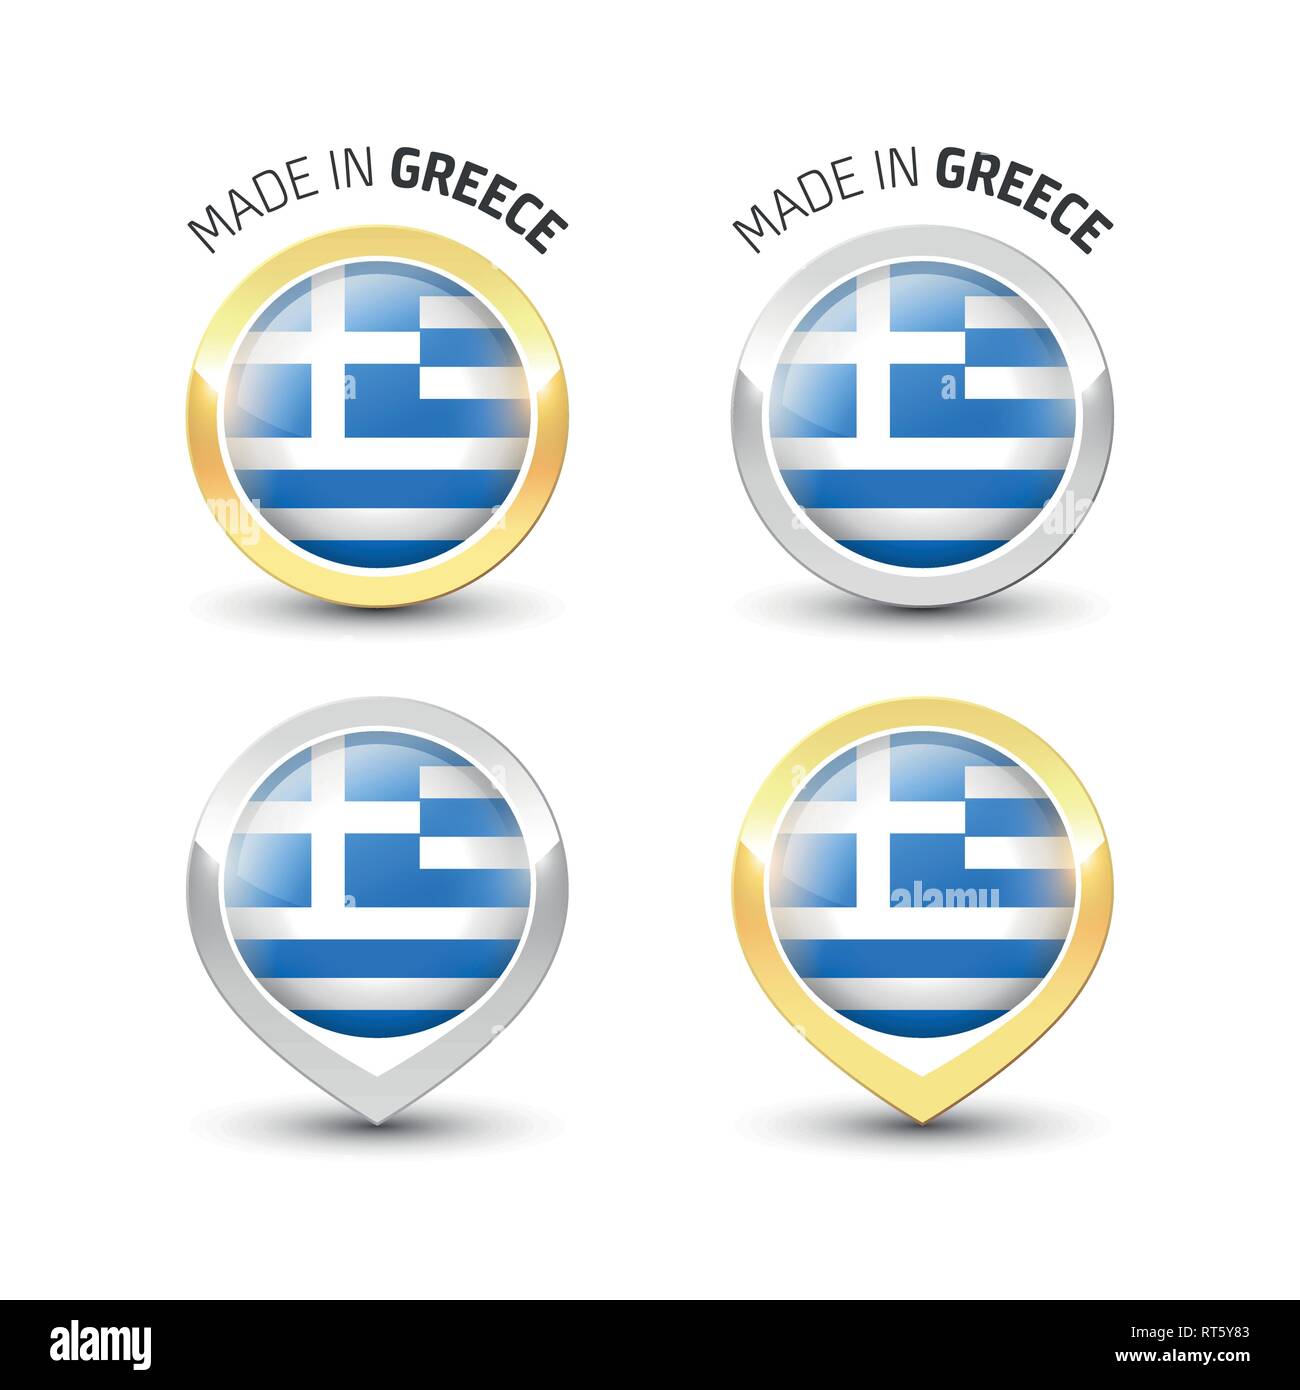 Made in Greece - Guarantee label with the Greek flag inside round gold and silver icons. Stock Vector